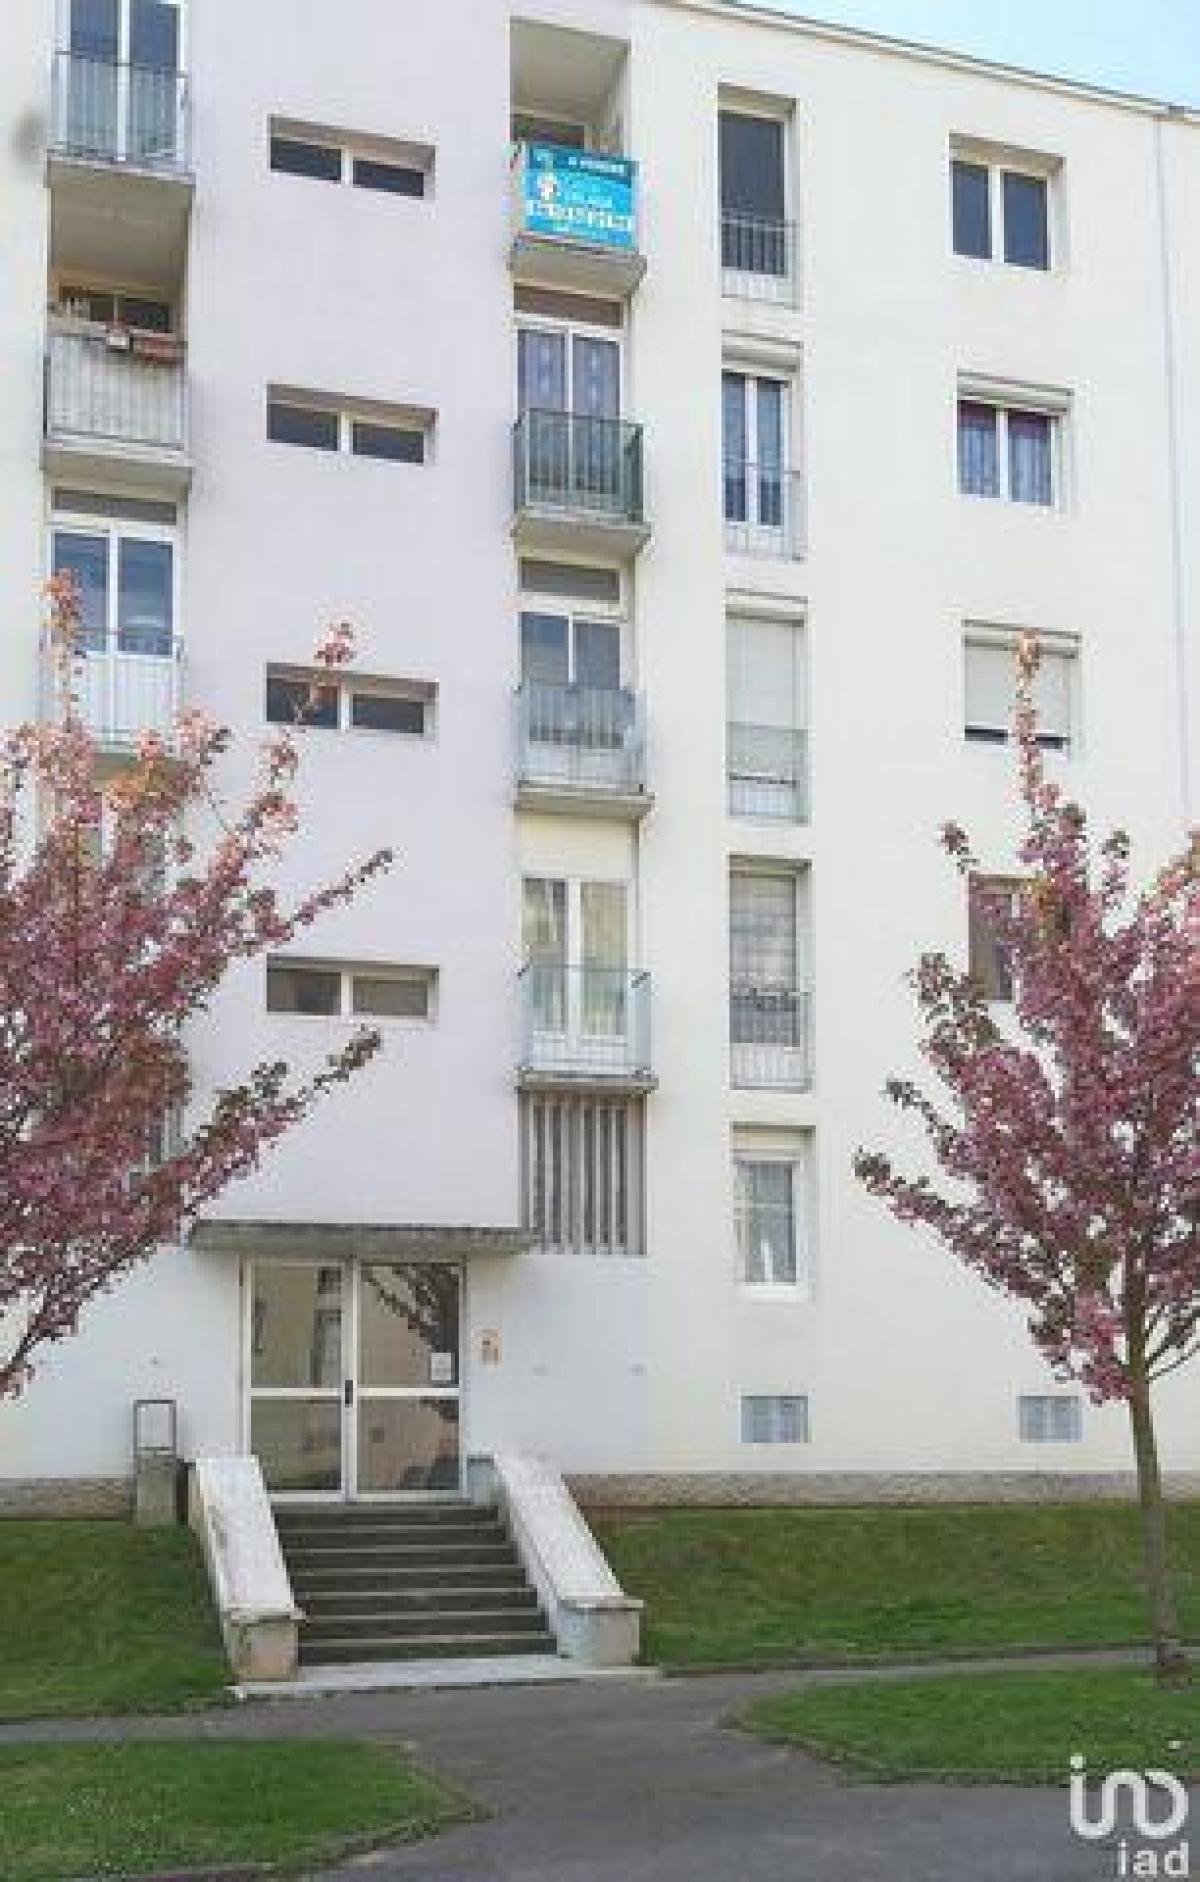 Picture of Condo For Sale in Noyon, Picardie, France